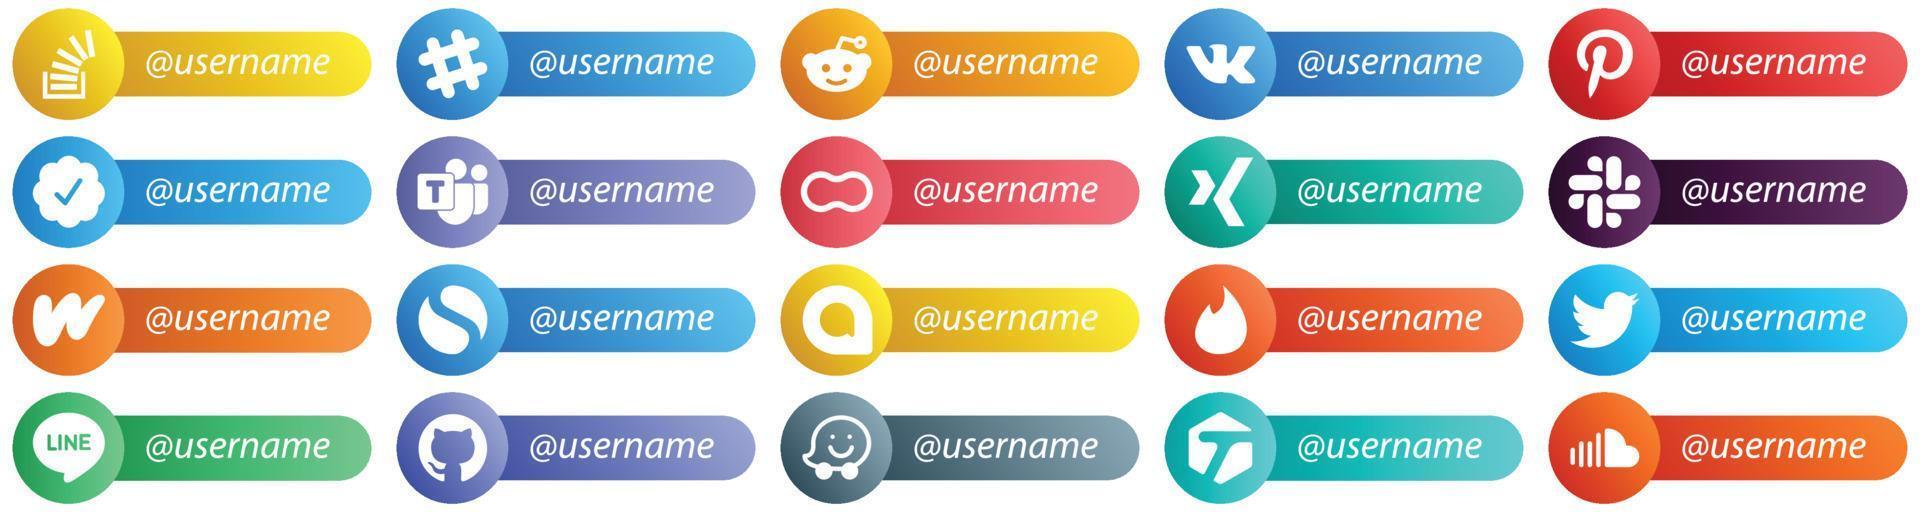 20 Follow me Social Network Platform Icons with Username such as literature. slack. twitter verified badge. xing and mothers icons. High definition and versatile vector